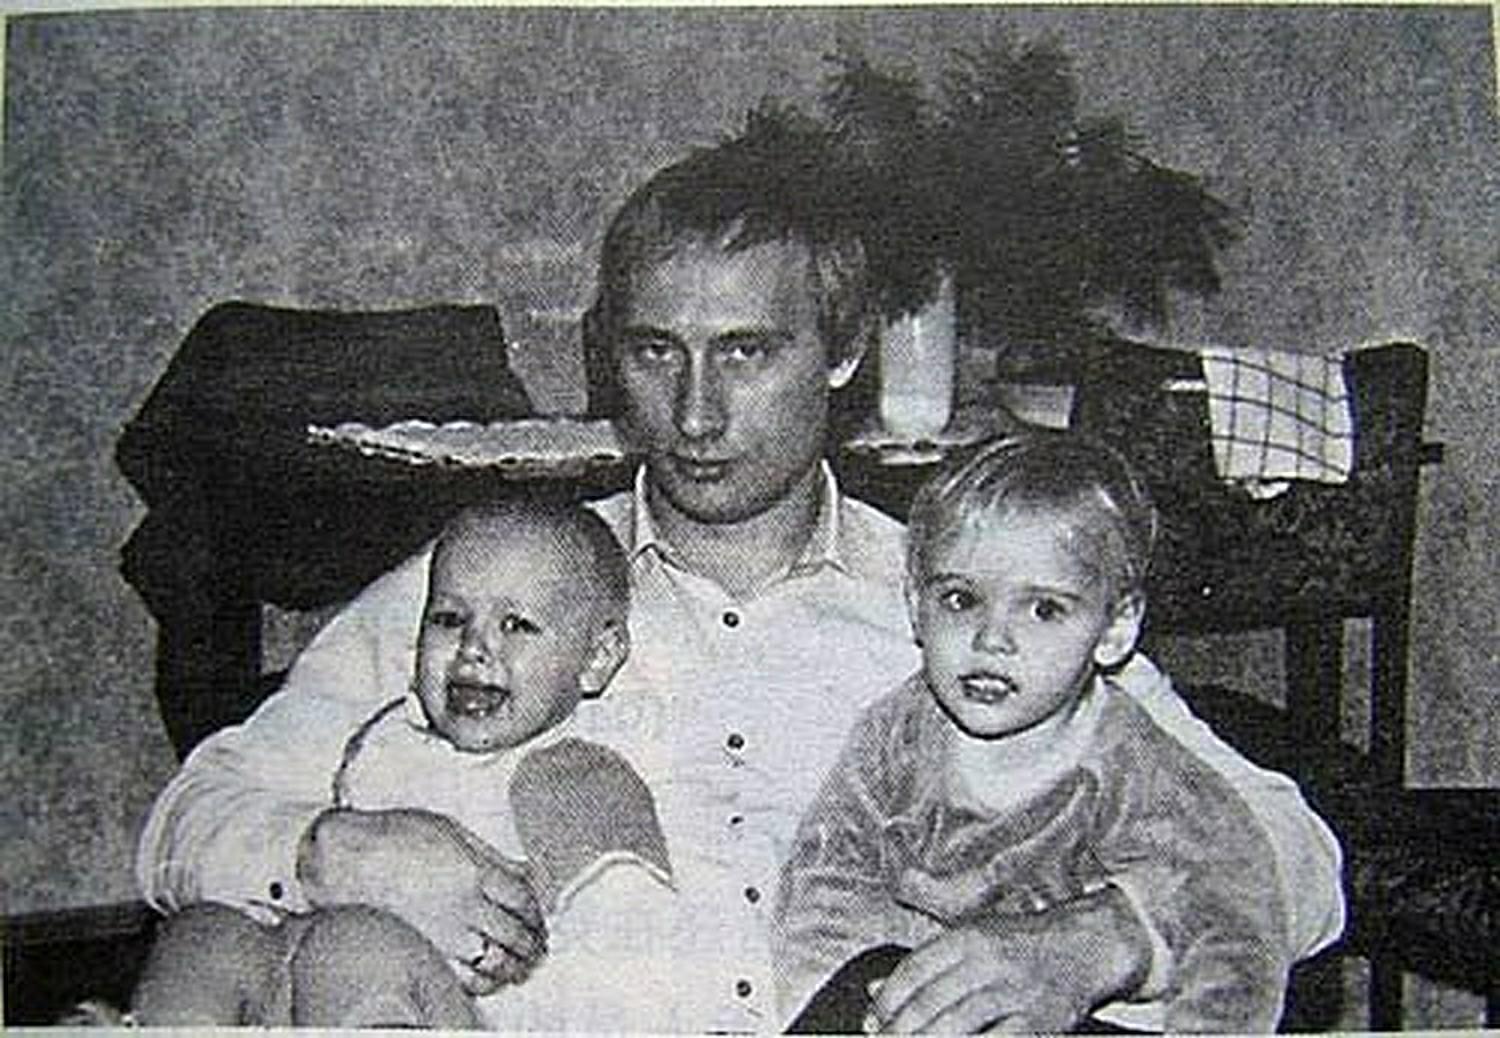 Young Putin with his kids